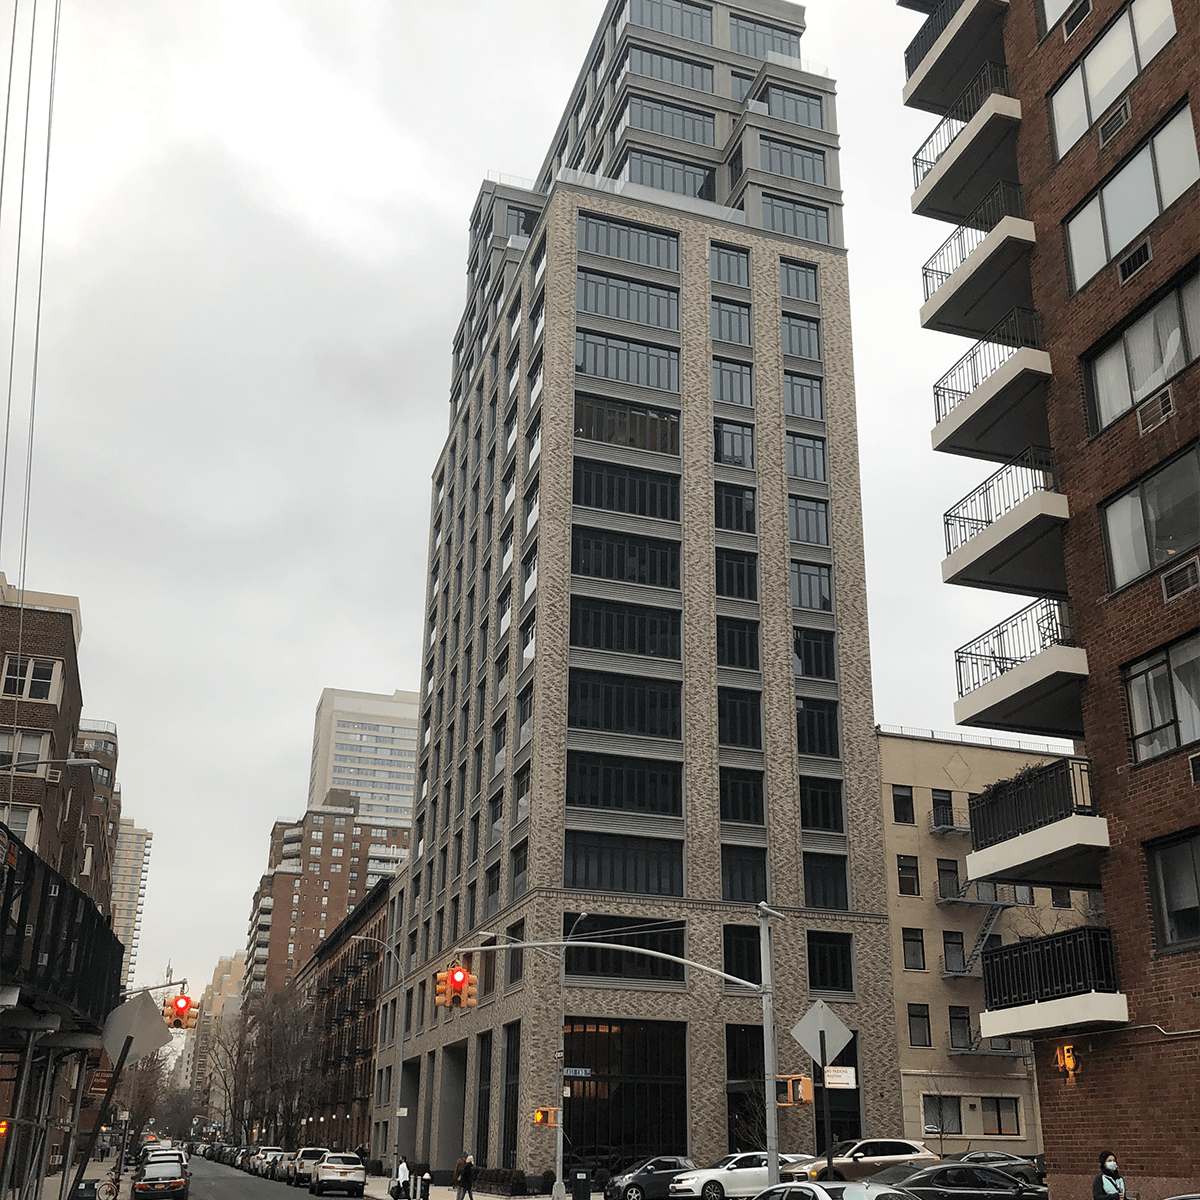 View of building from down the block